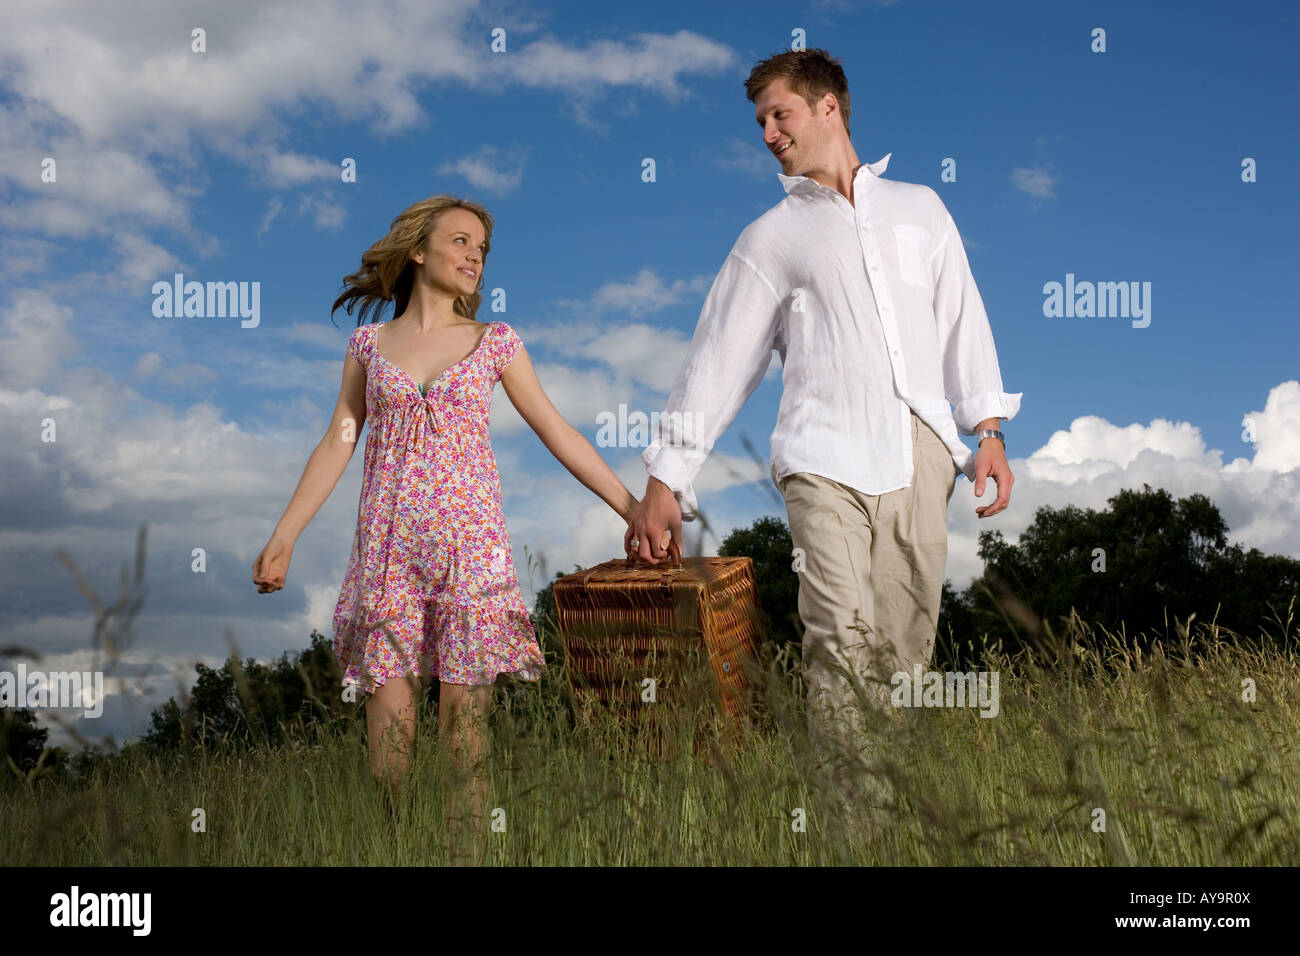 Couple on summer picnic with hamper Stock Photo